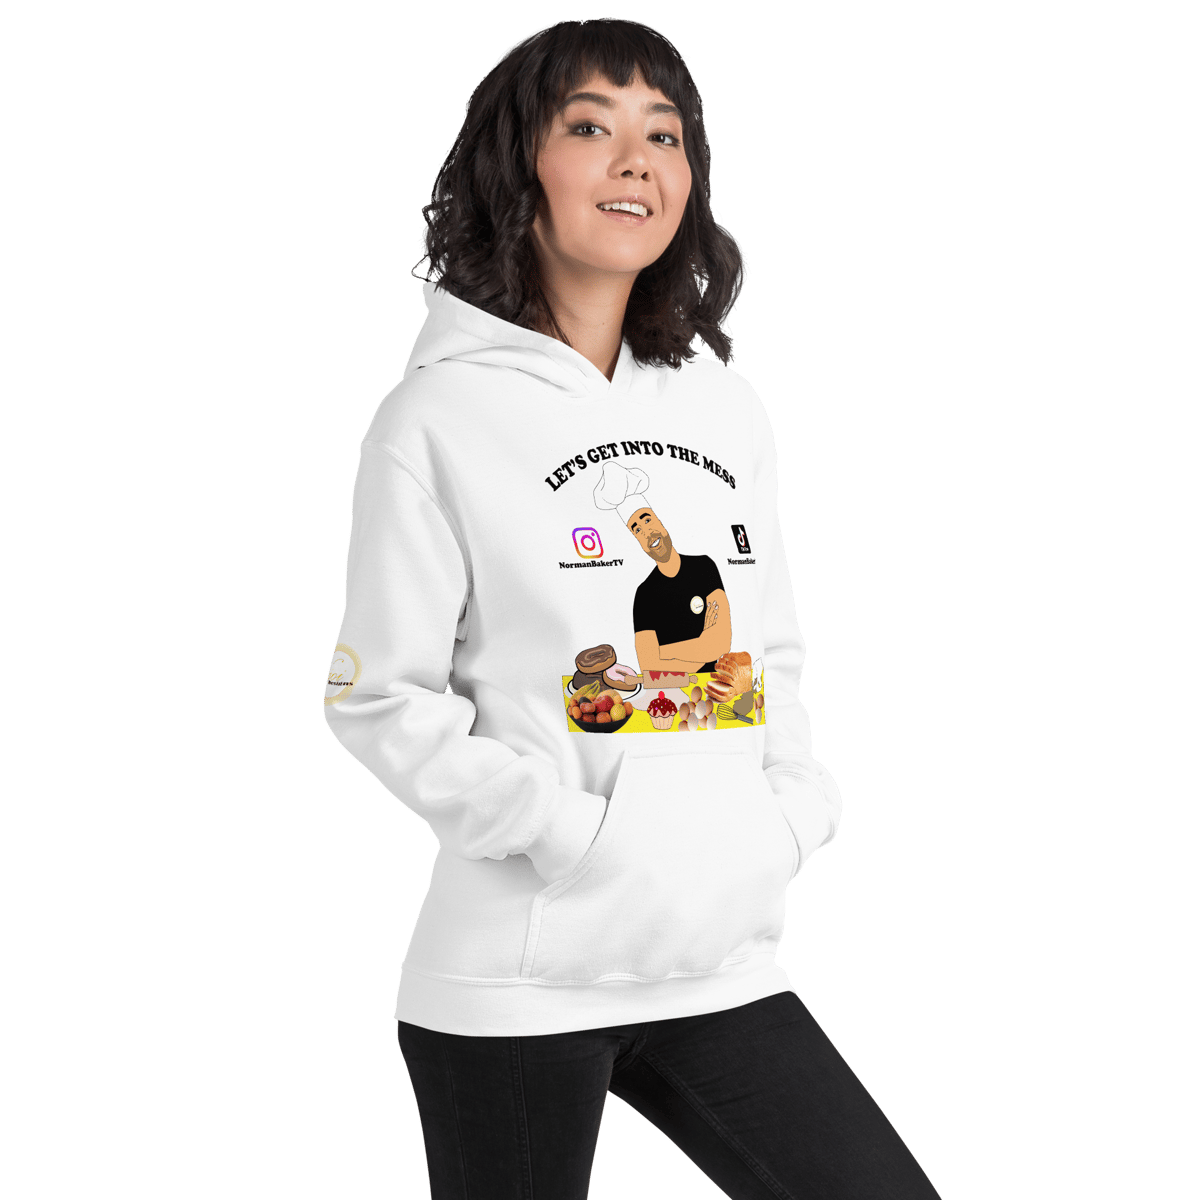 Image of LET'S GET INTO THE MESS HOODIE